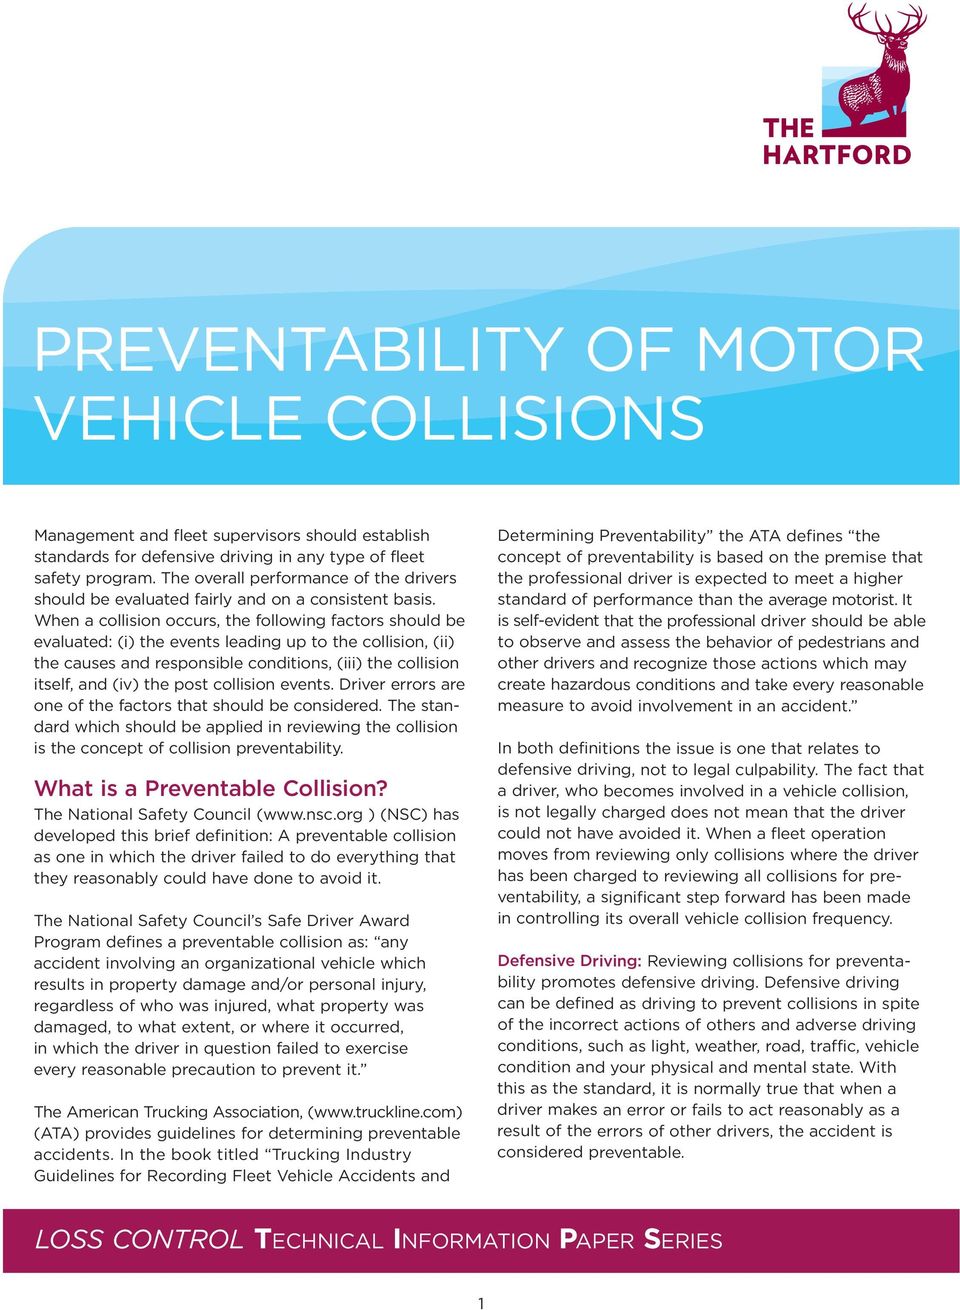 When a collision occurs, the following factors should be evaluated: (i) the events leading up to the collision, (ii) the causes and responsible conditions, (iii) the collision itself, and (iv) the